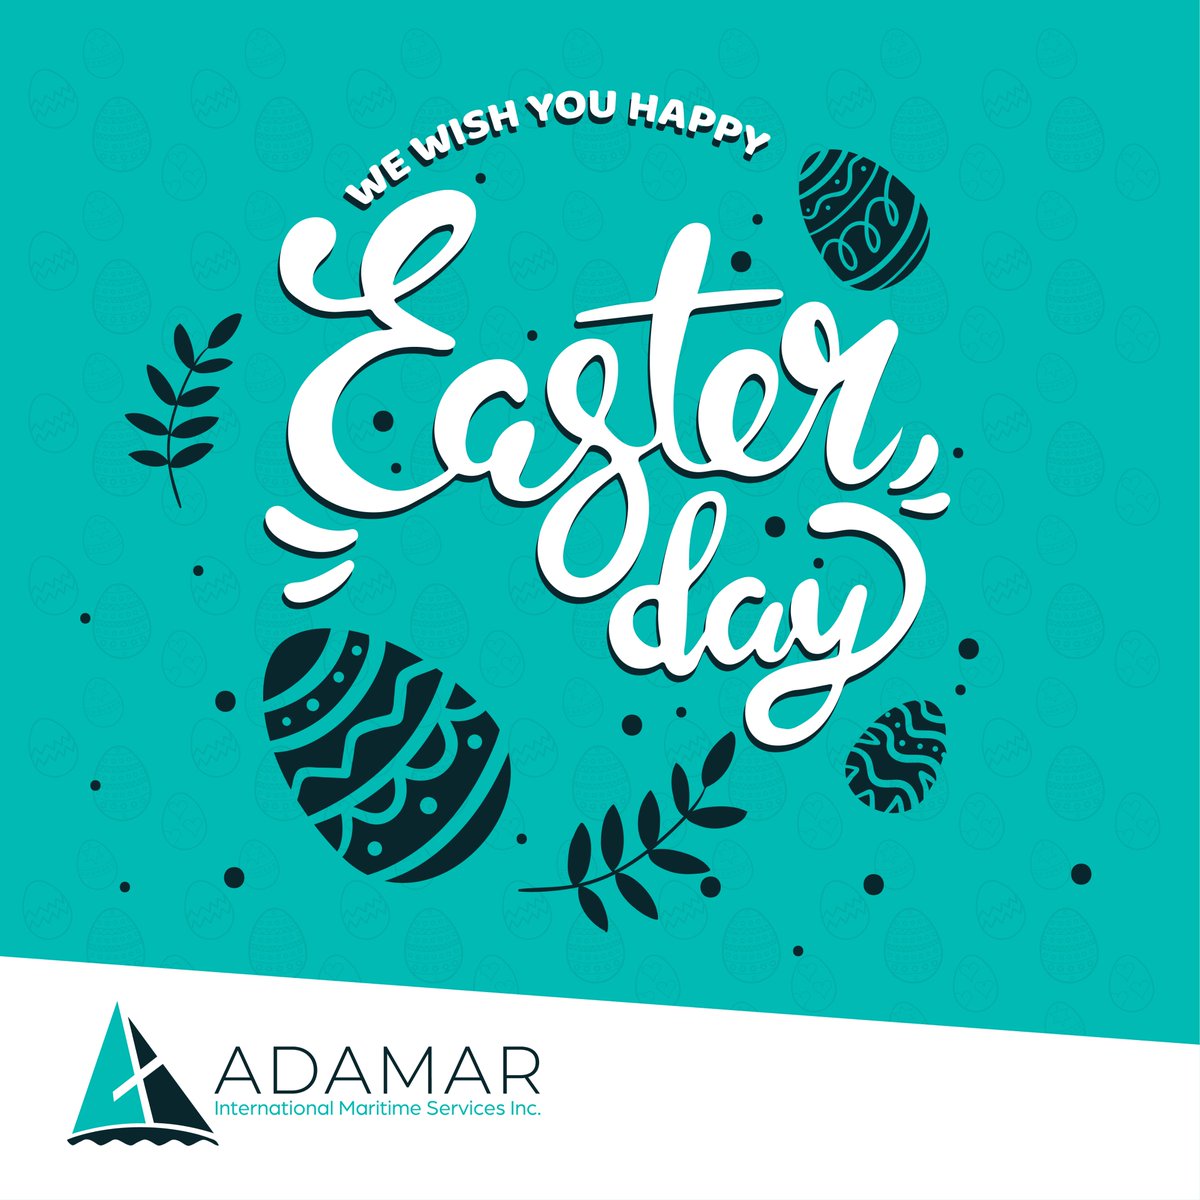 From our family to yours, wishing you a Happy Easter filled with precious memories!

May this Easter brings you peace, happiness, and all the Season’s joy!⠀
⠀
#HappyEaster #ShipSupply #ShipChandler #Maritime #MarineServices #MarineValves #ShipRepair #InhouseWorkshop